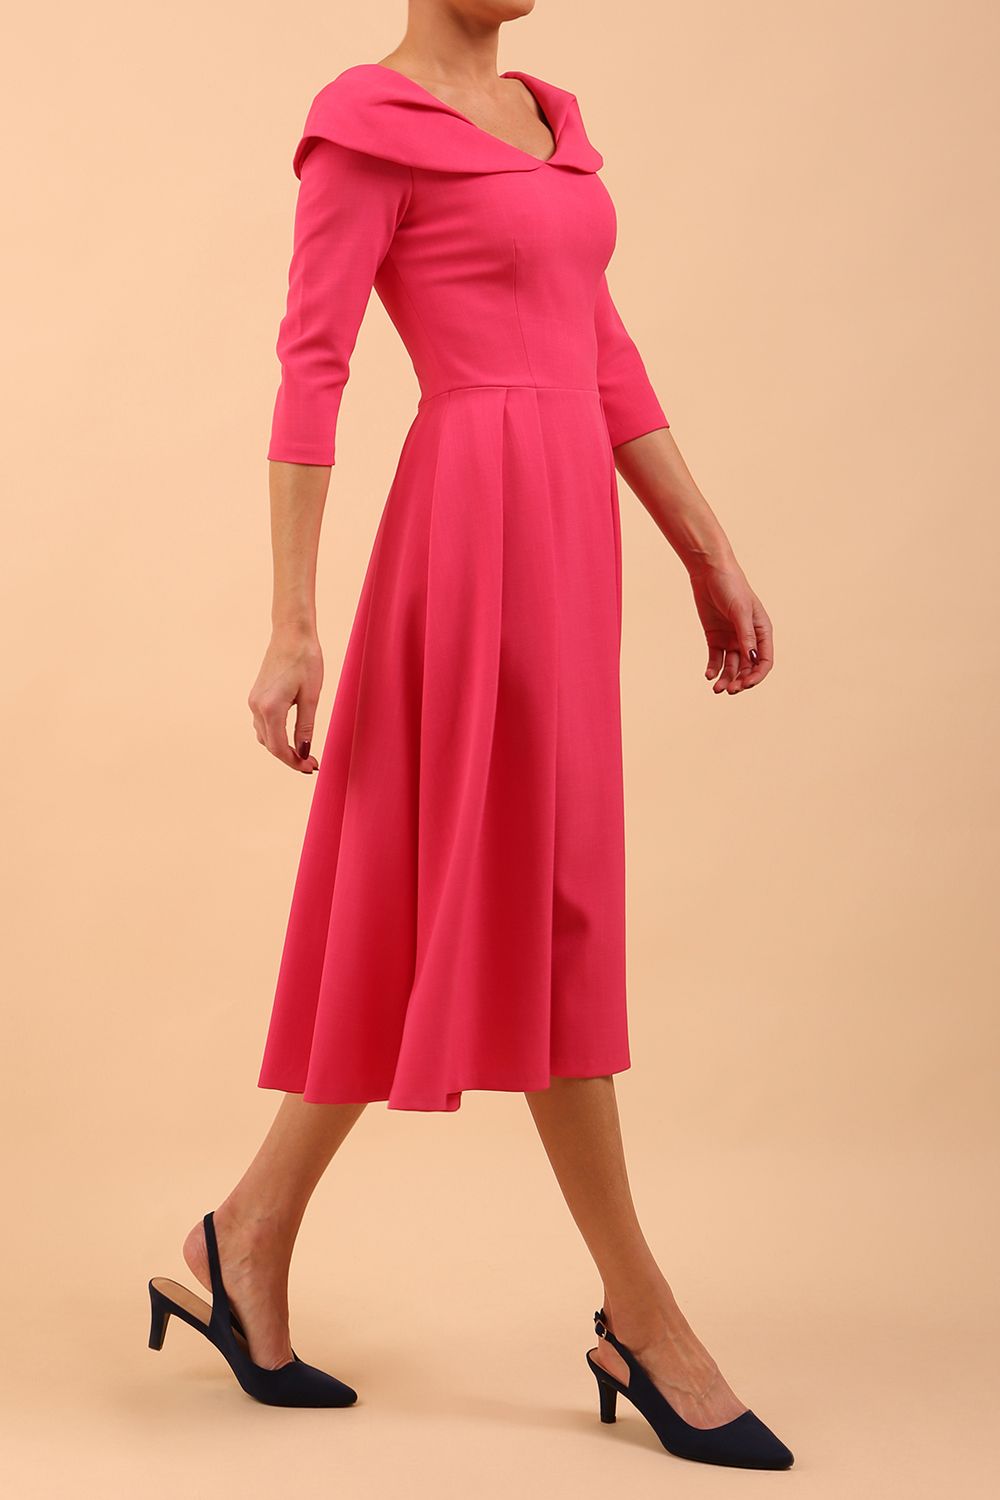 Model wearing Diva Catwalk Chesterton Sleeved dress with oversized collar detail and a-line swing pleated skirt in colour fuchsia pink front side